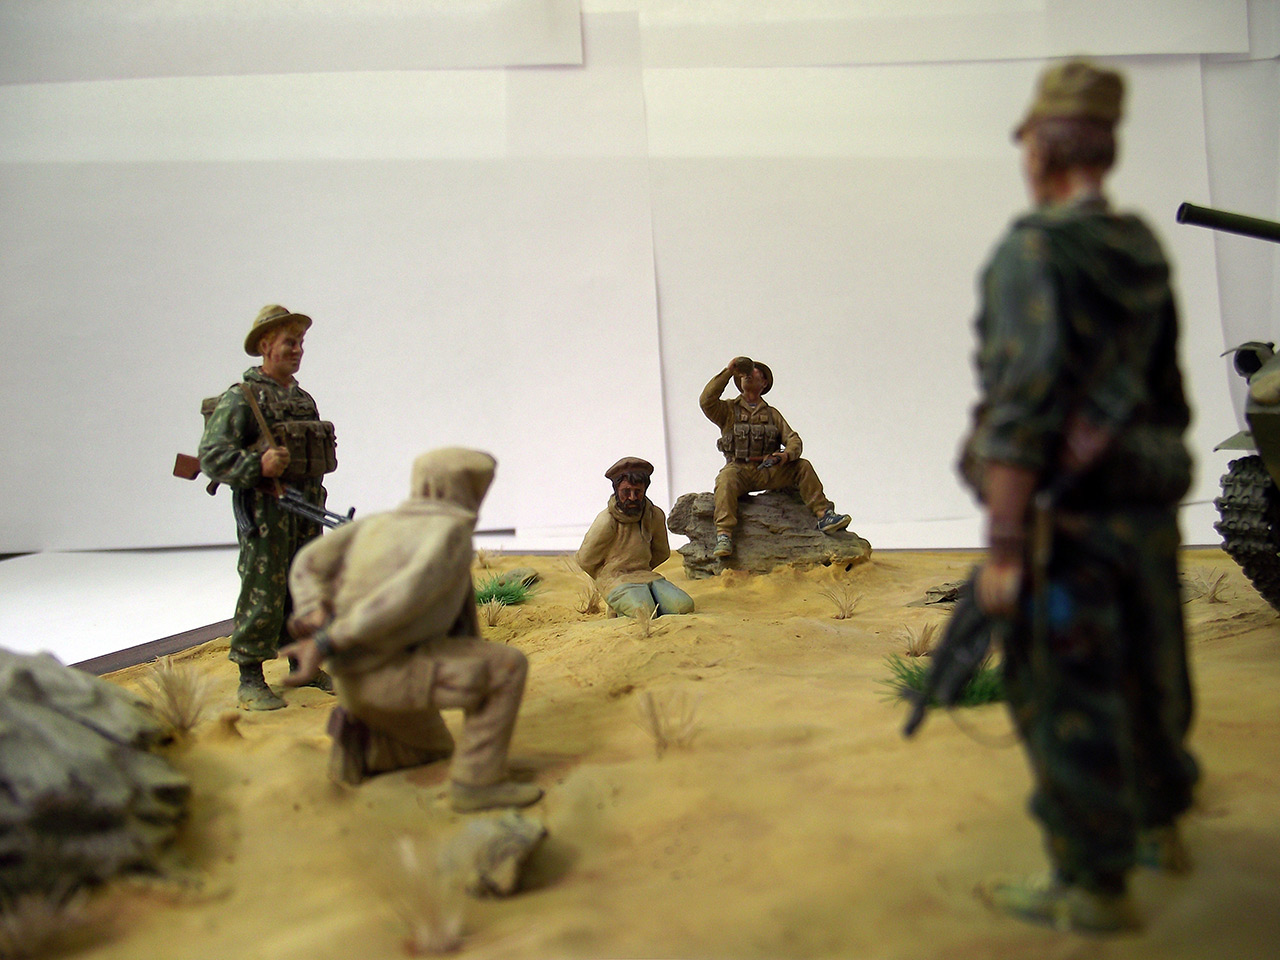 Dioramas and Vignettes: Ask the desert..., photo #13